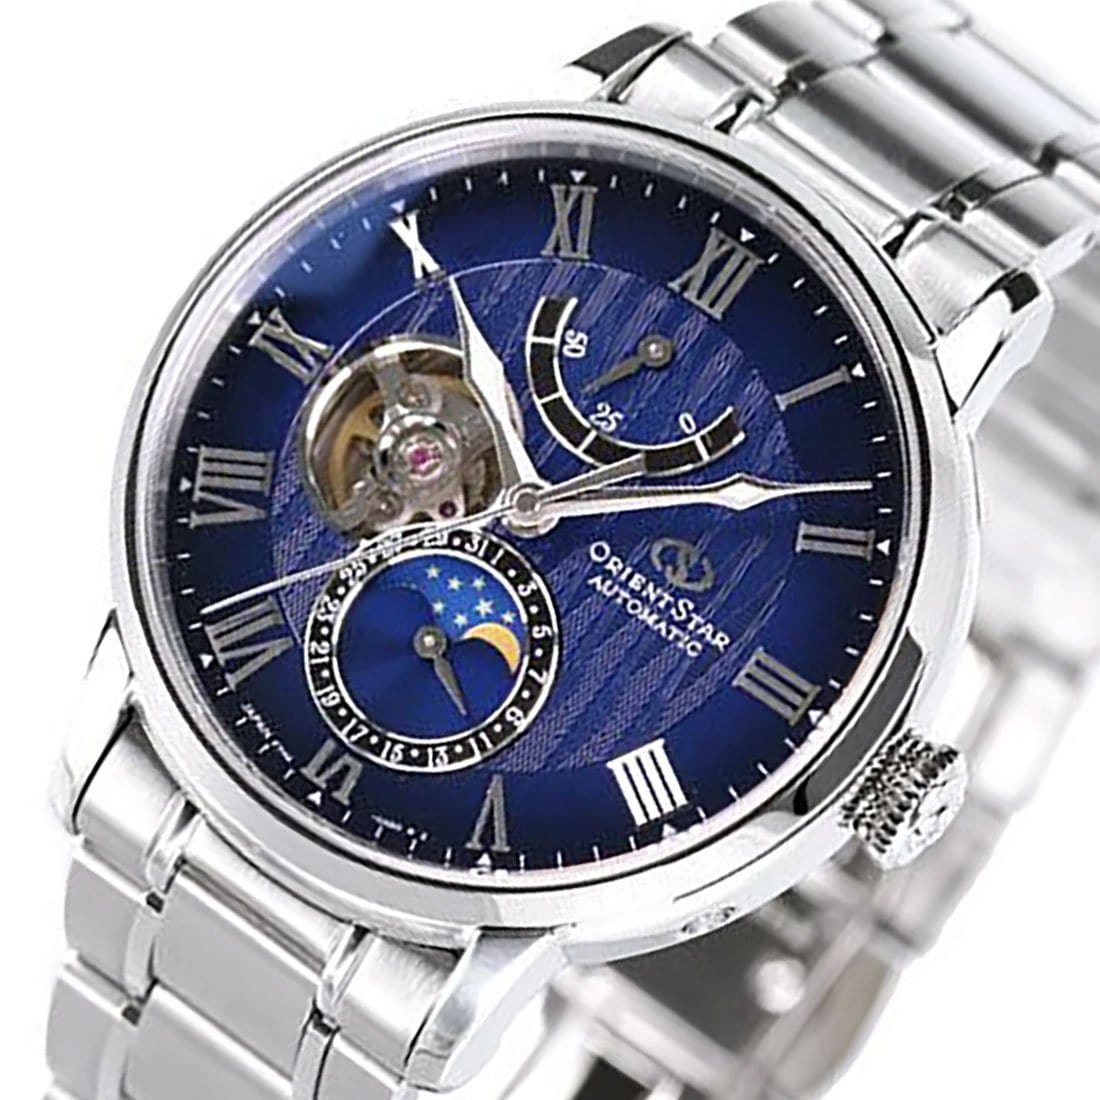 Orient Star Made in Japan Automatic Open Heart Watch RE-AY0103L00B RE-AY0103L